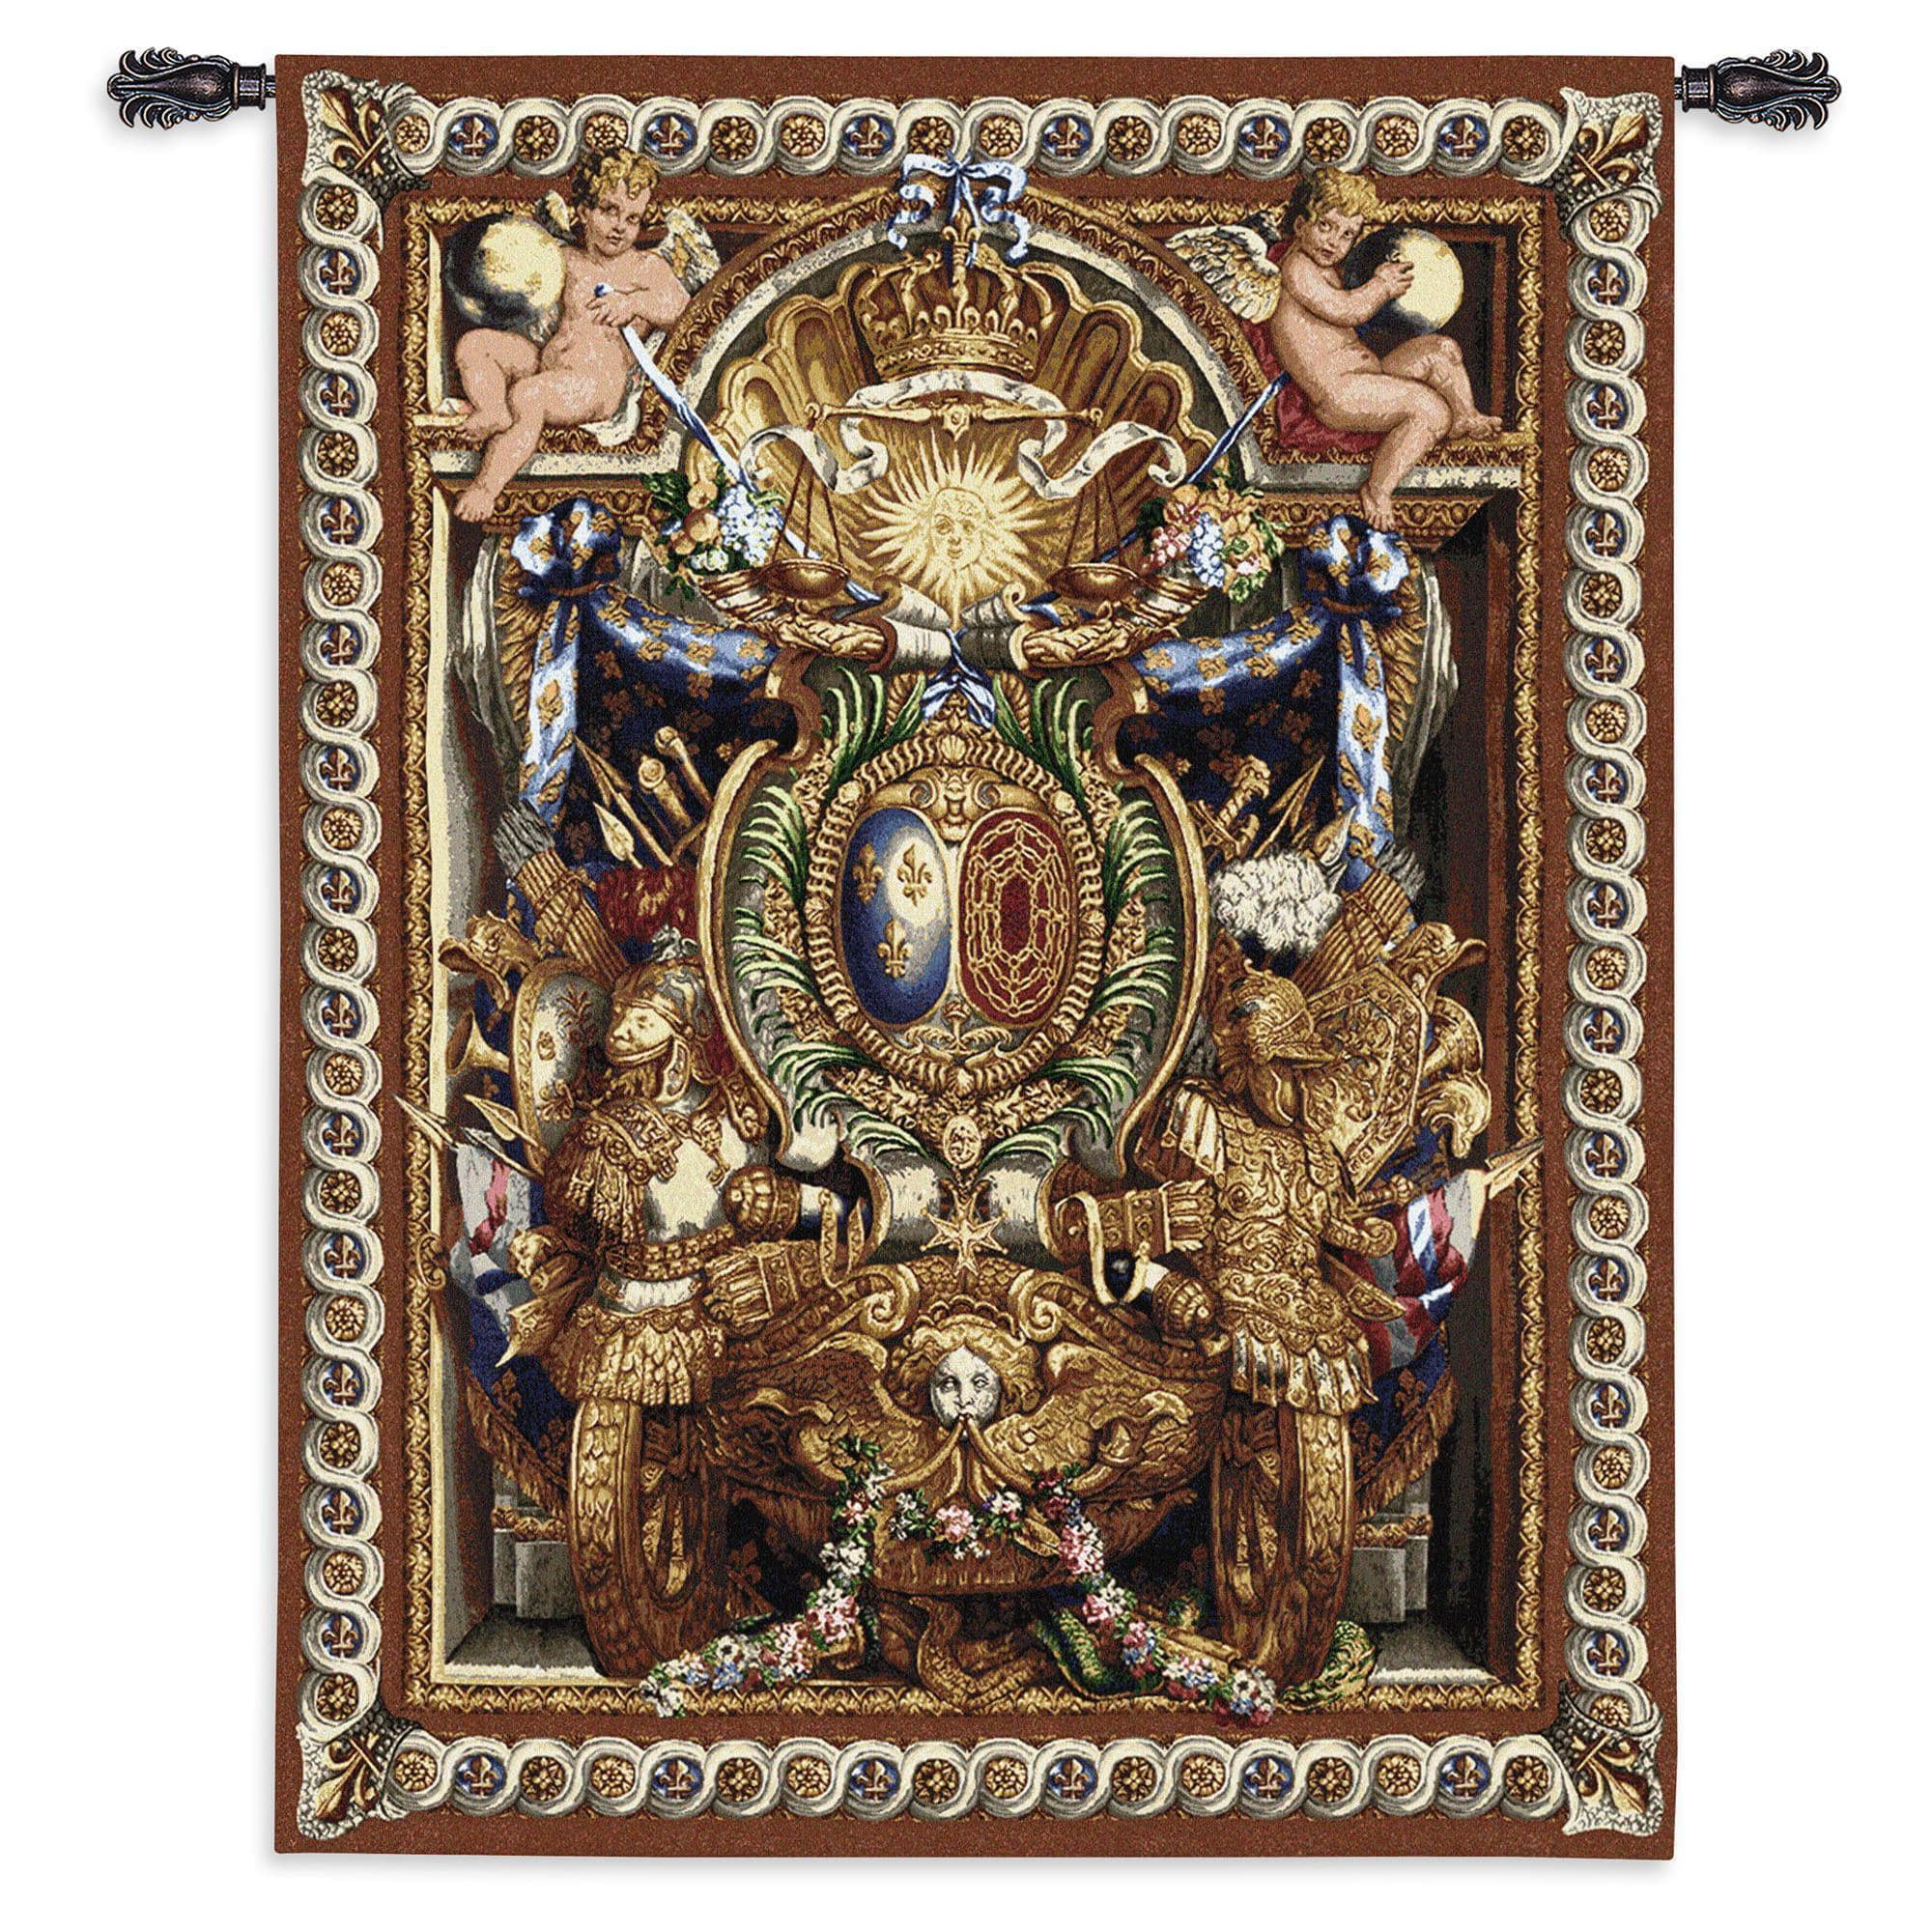 Golden Tapestry 37x53 Tapestry Wall Hanging